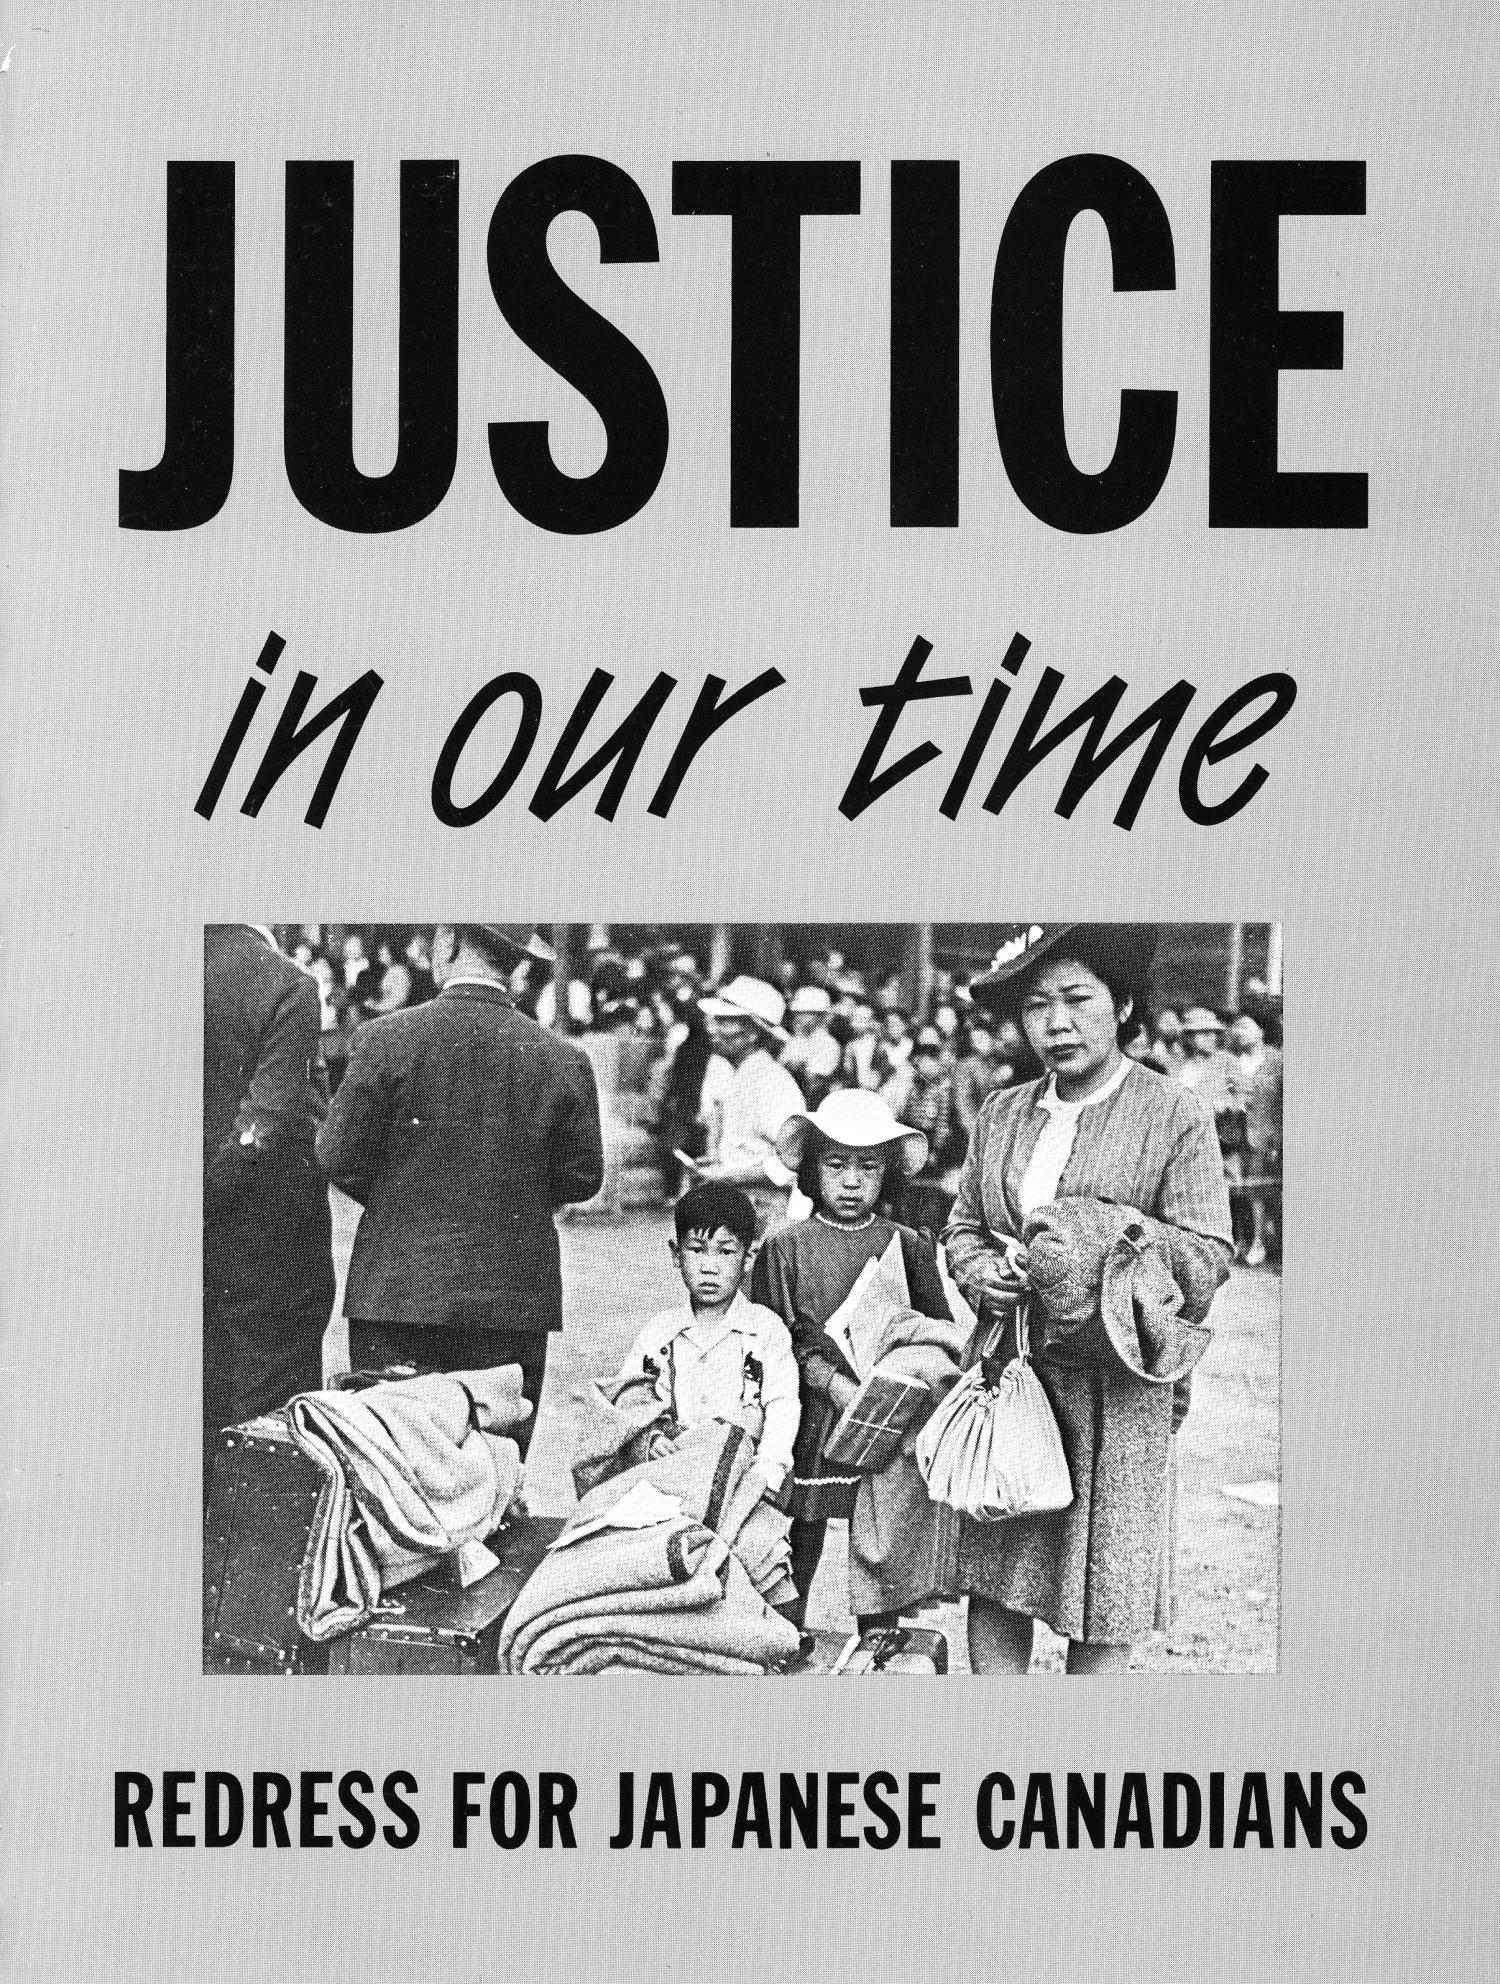 The book, produced by the National Association of Japanese Canadians (NAJC), contains information about the Japanese Canadian Internment, reasons for a redress for Japanese Canadians, information about the redress for Japanese Americans